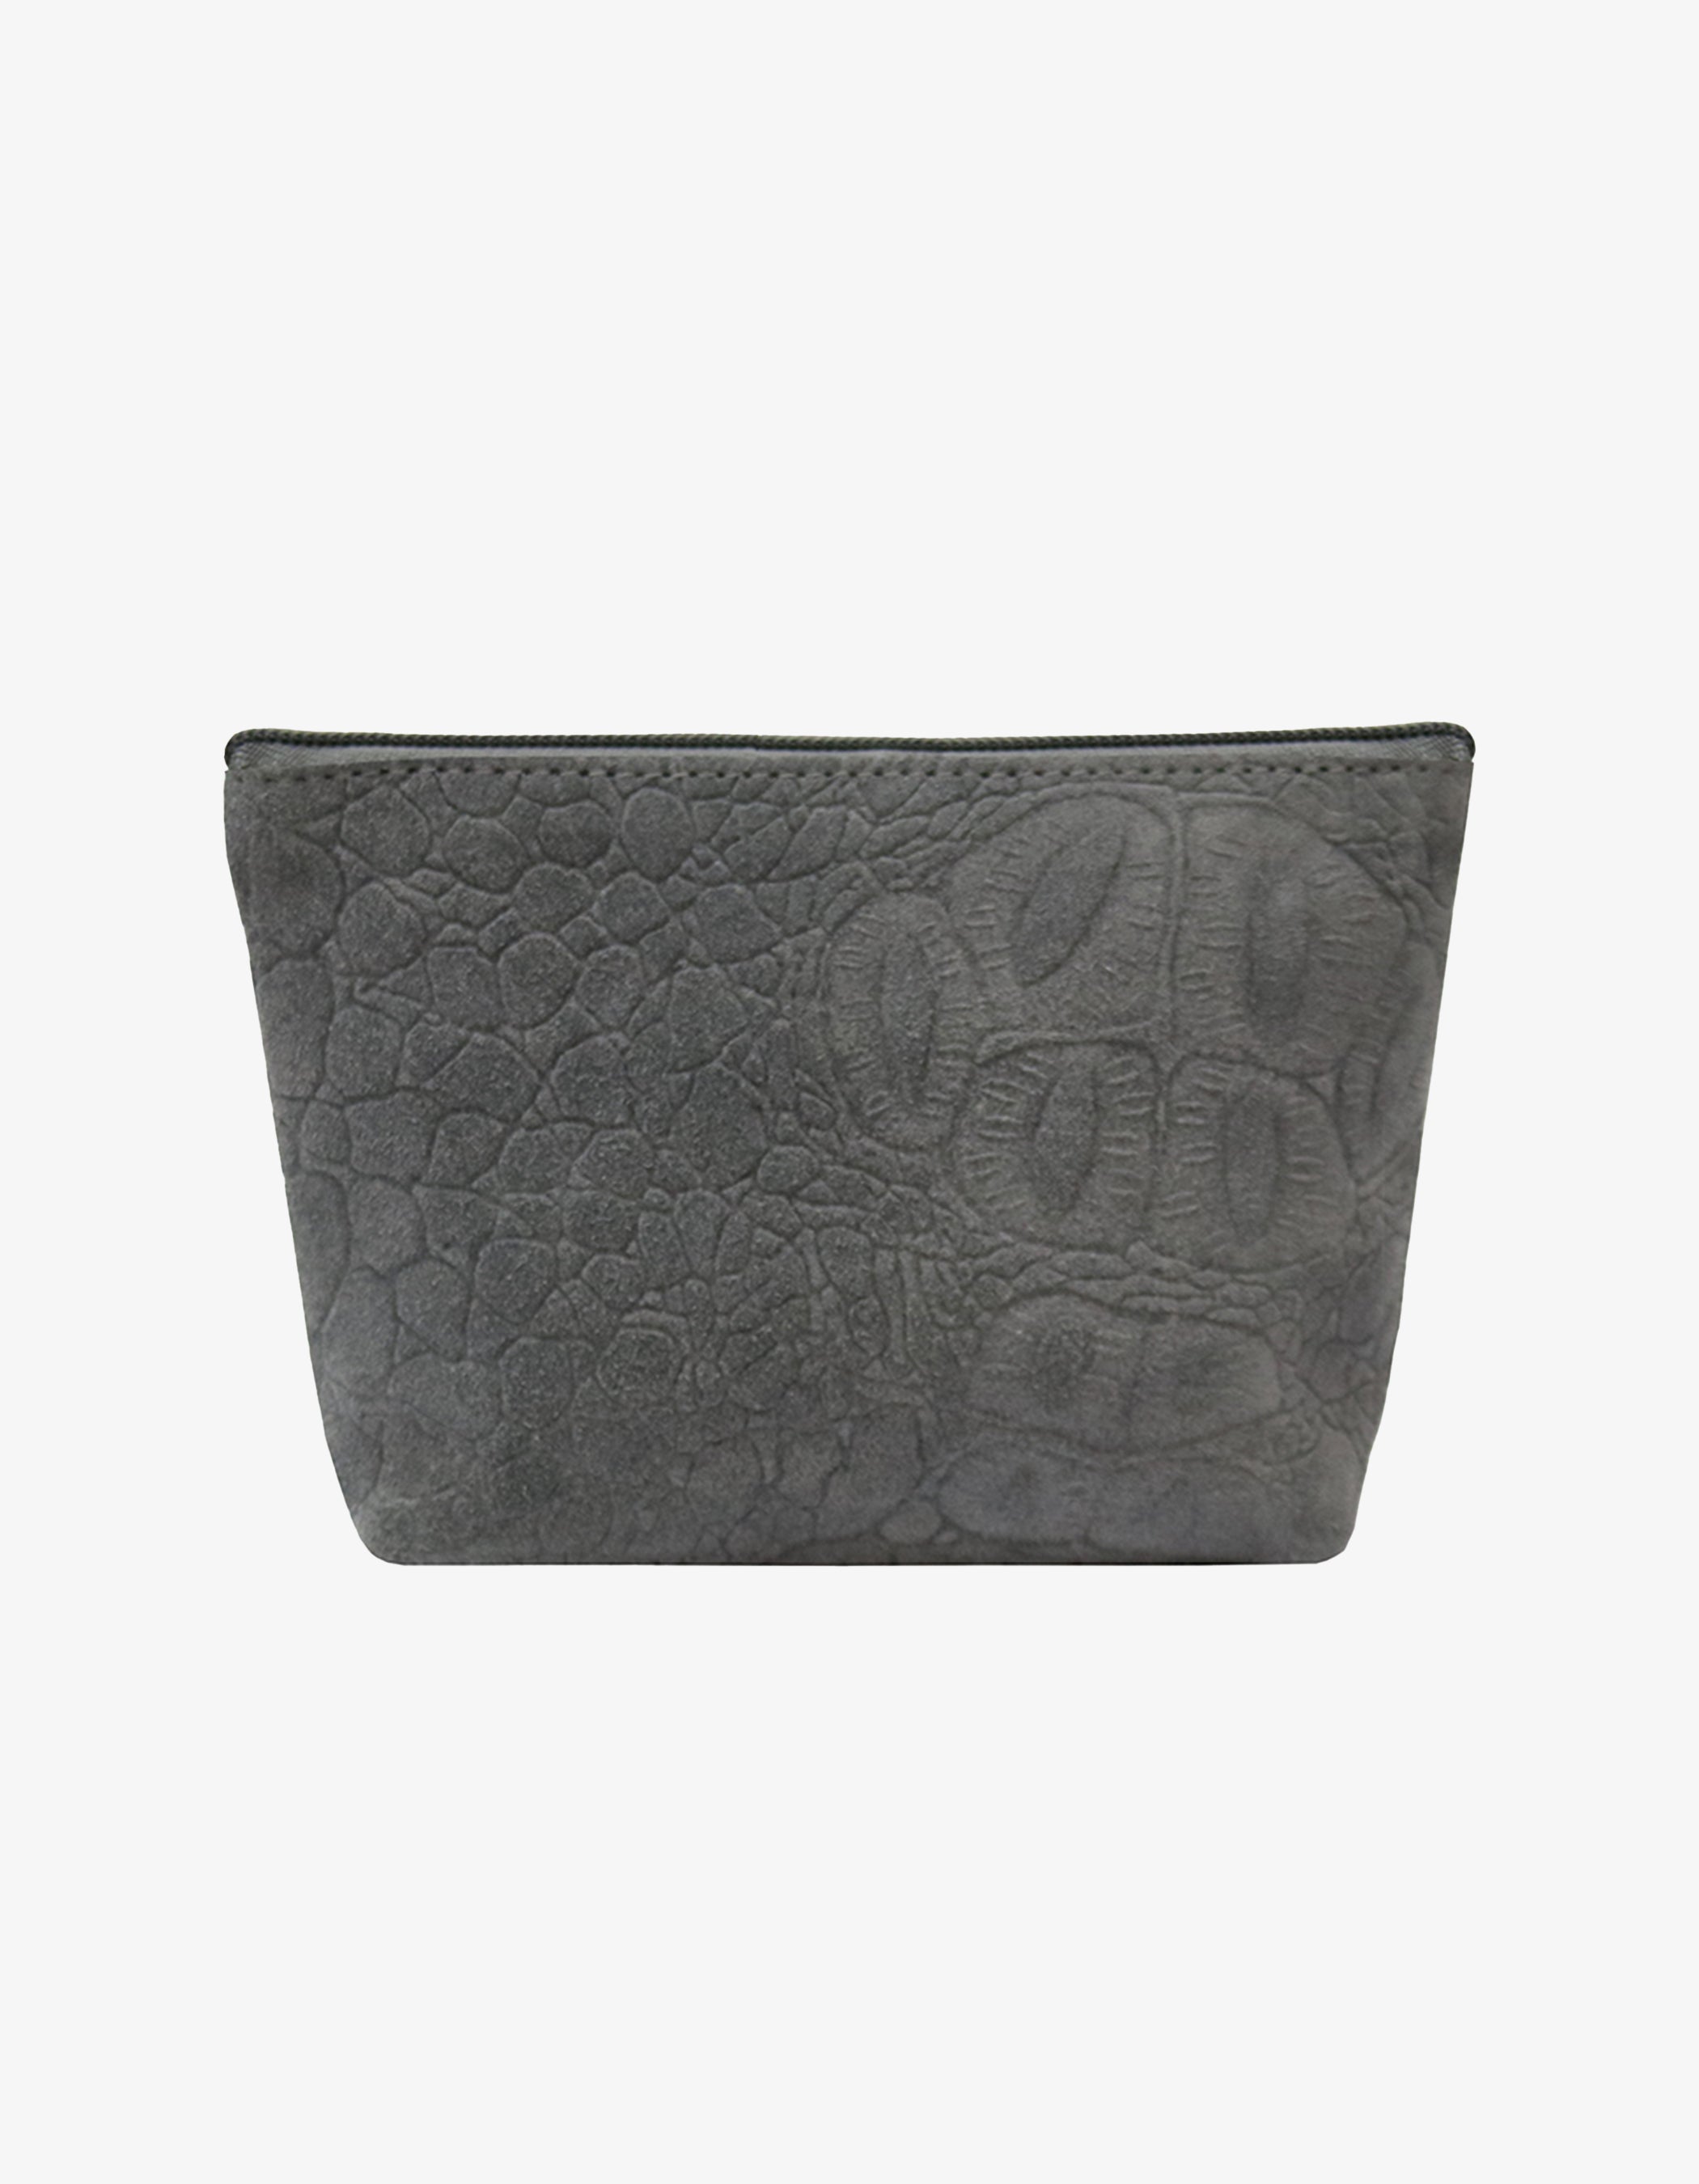 Le Forge Coco Suede Pouch